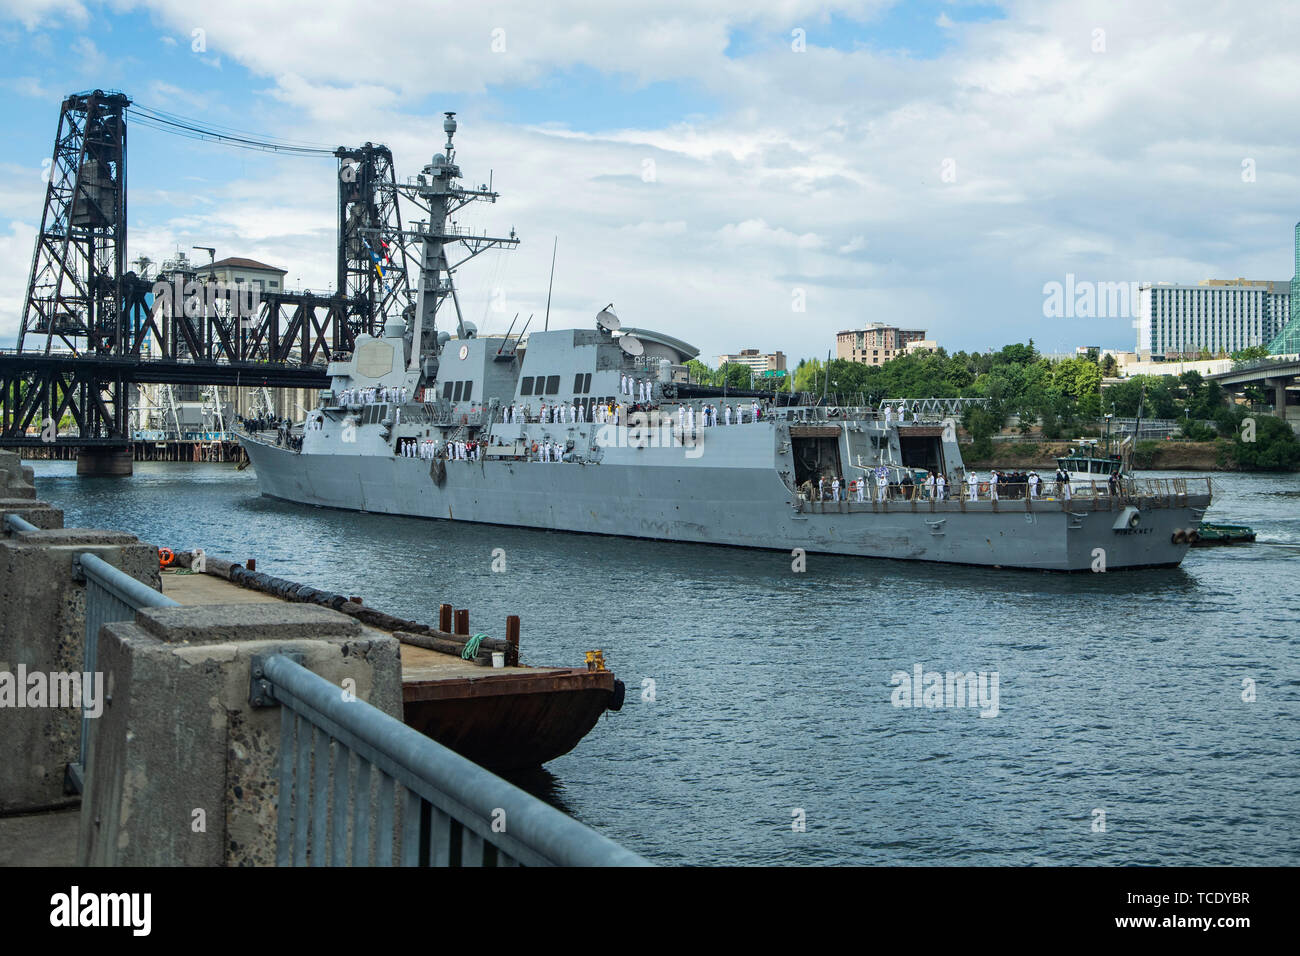 190606-N-DX615-1038 PORTLAND, Ore. (June 6, 2019) The Arleigh Burke-class guided-missile destroyer USS Pinckney (DDG 91) prepares to moor in Portland for Portland Fleet Week. The annual event is a time-honored celebration of the sea services and provides an opportunity for the citizens of Oregon to meet Sailors, Marines and Coast Guardsmen, as well as witness firsthand the latest capabilities of today’s maritime services. (U.S. Navy photo by Chief Mass Communication Specialist Alan Gragg) Stock Photo